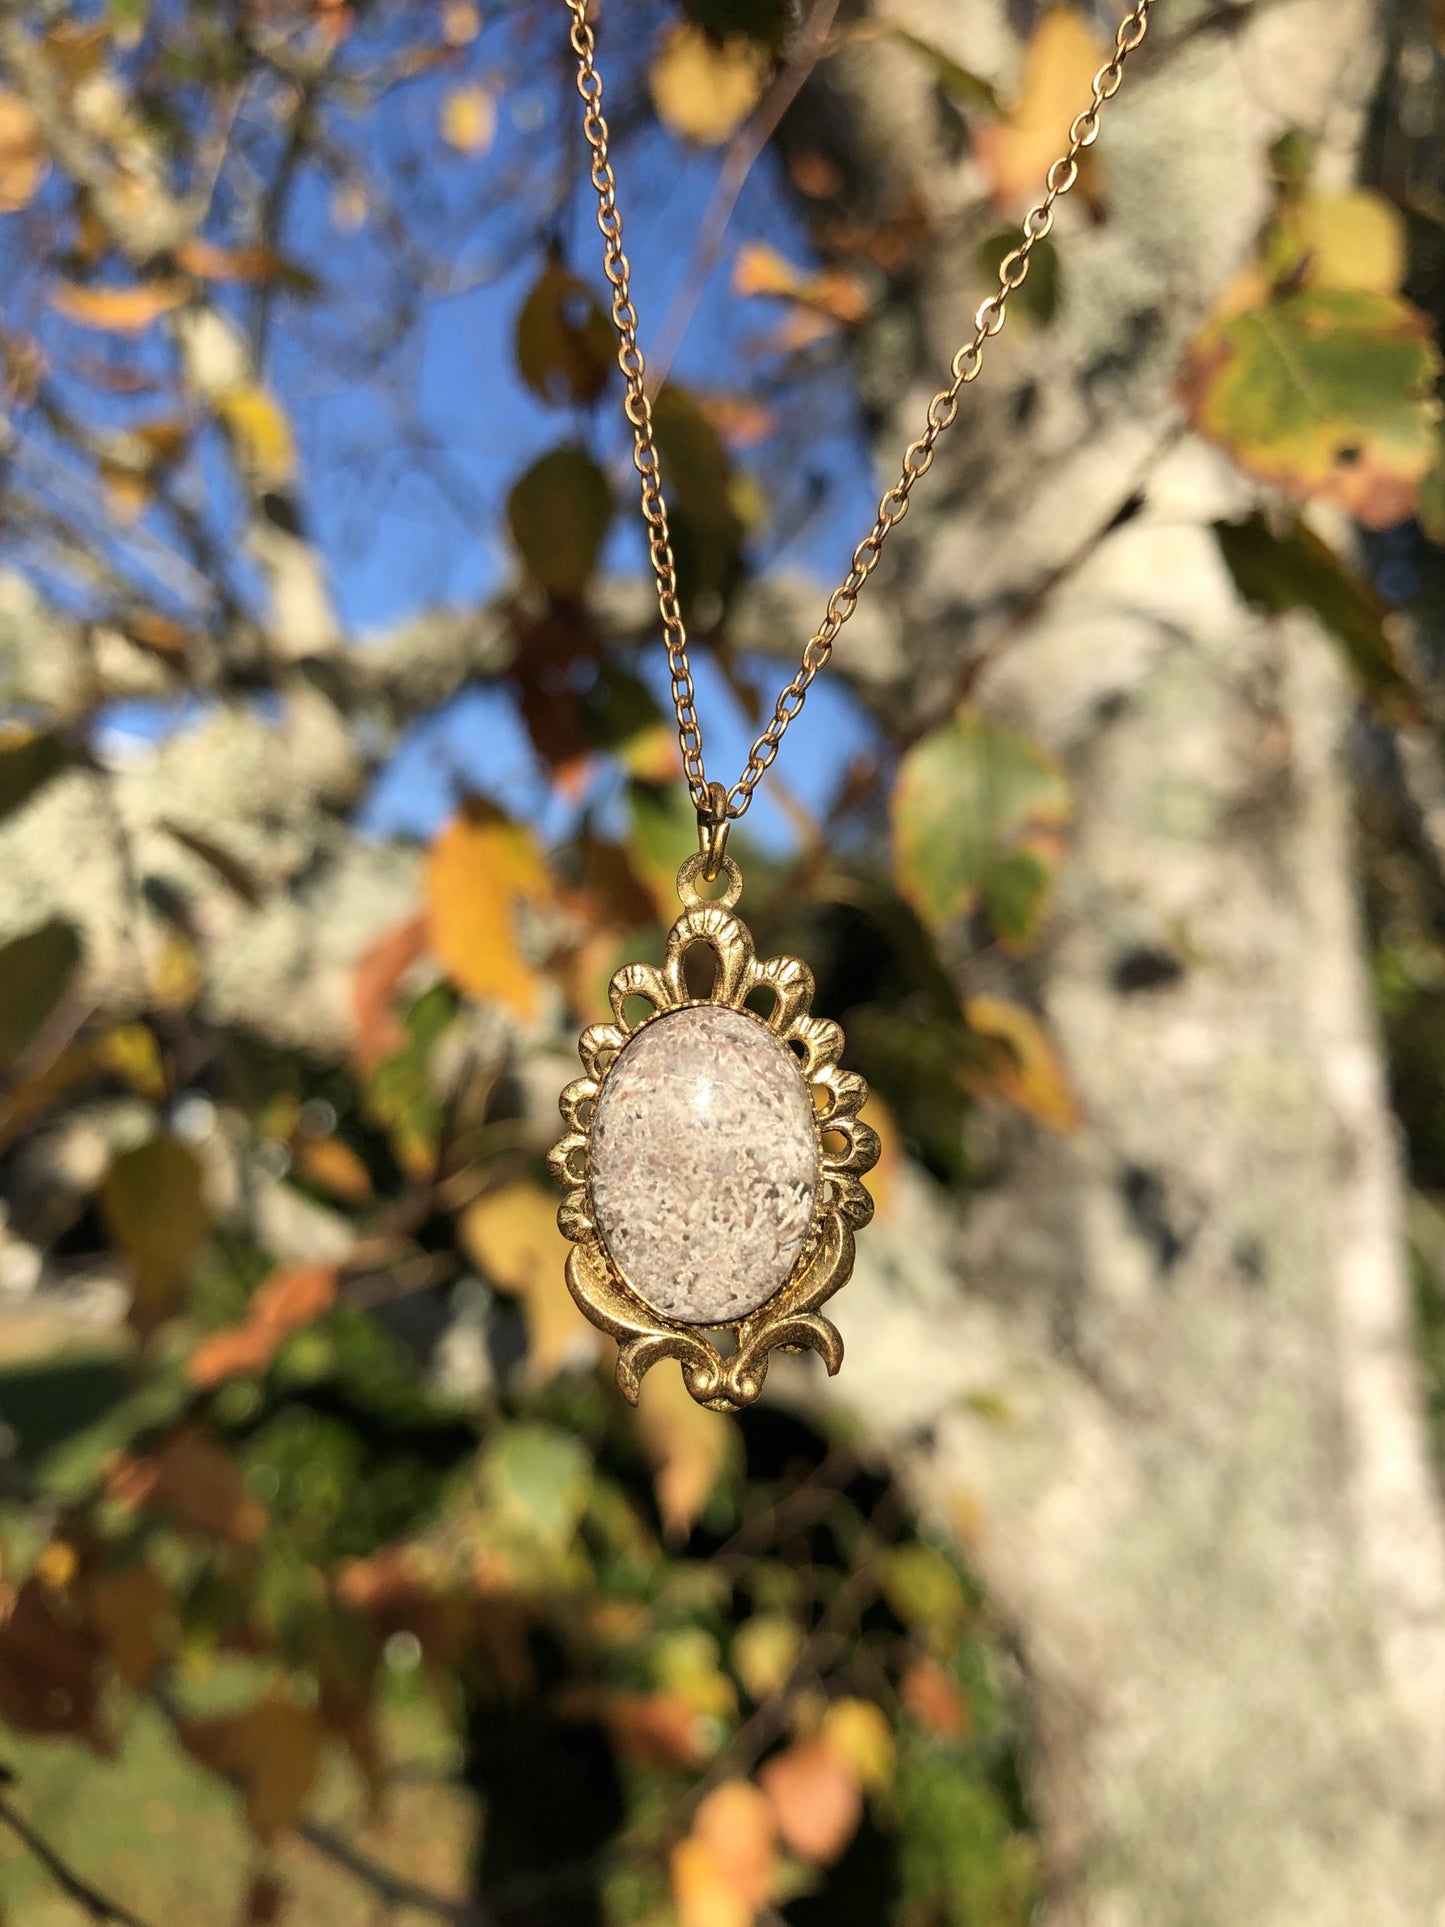 Necklace with Chrysanthemum Rhyolite from Tairua New Zealand with intricate gray and white chrysanthemum patterns, hand polished to a 15x11mm cabochon and set in a gold plated setting with 19 inch chain, with tree-1